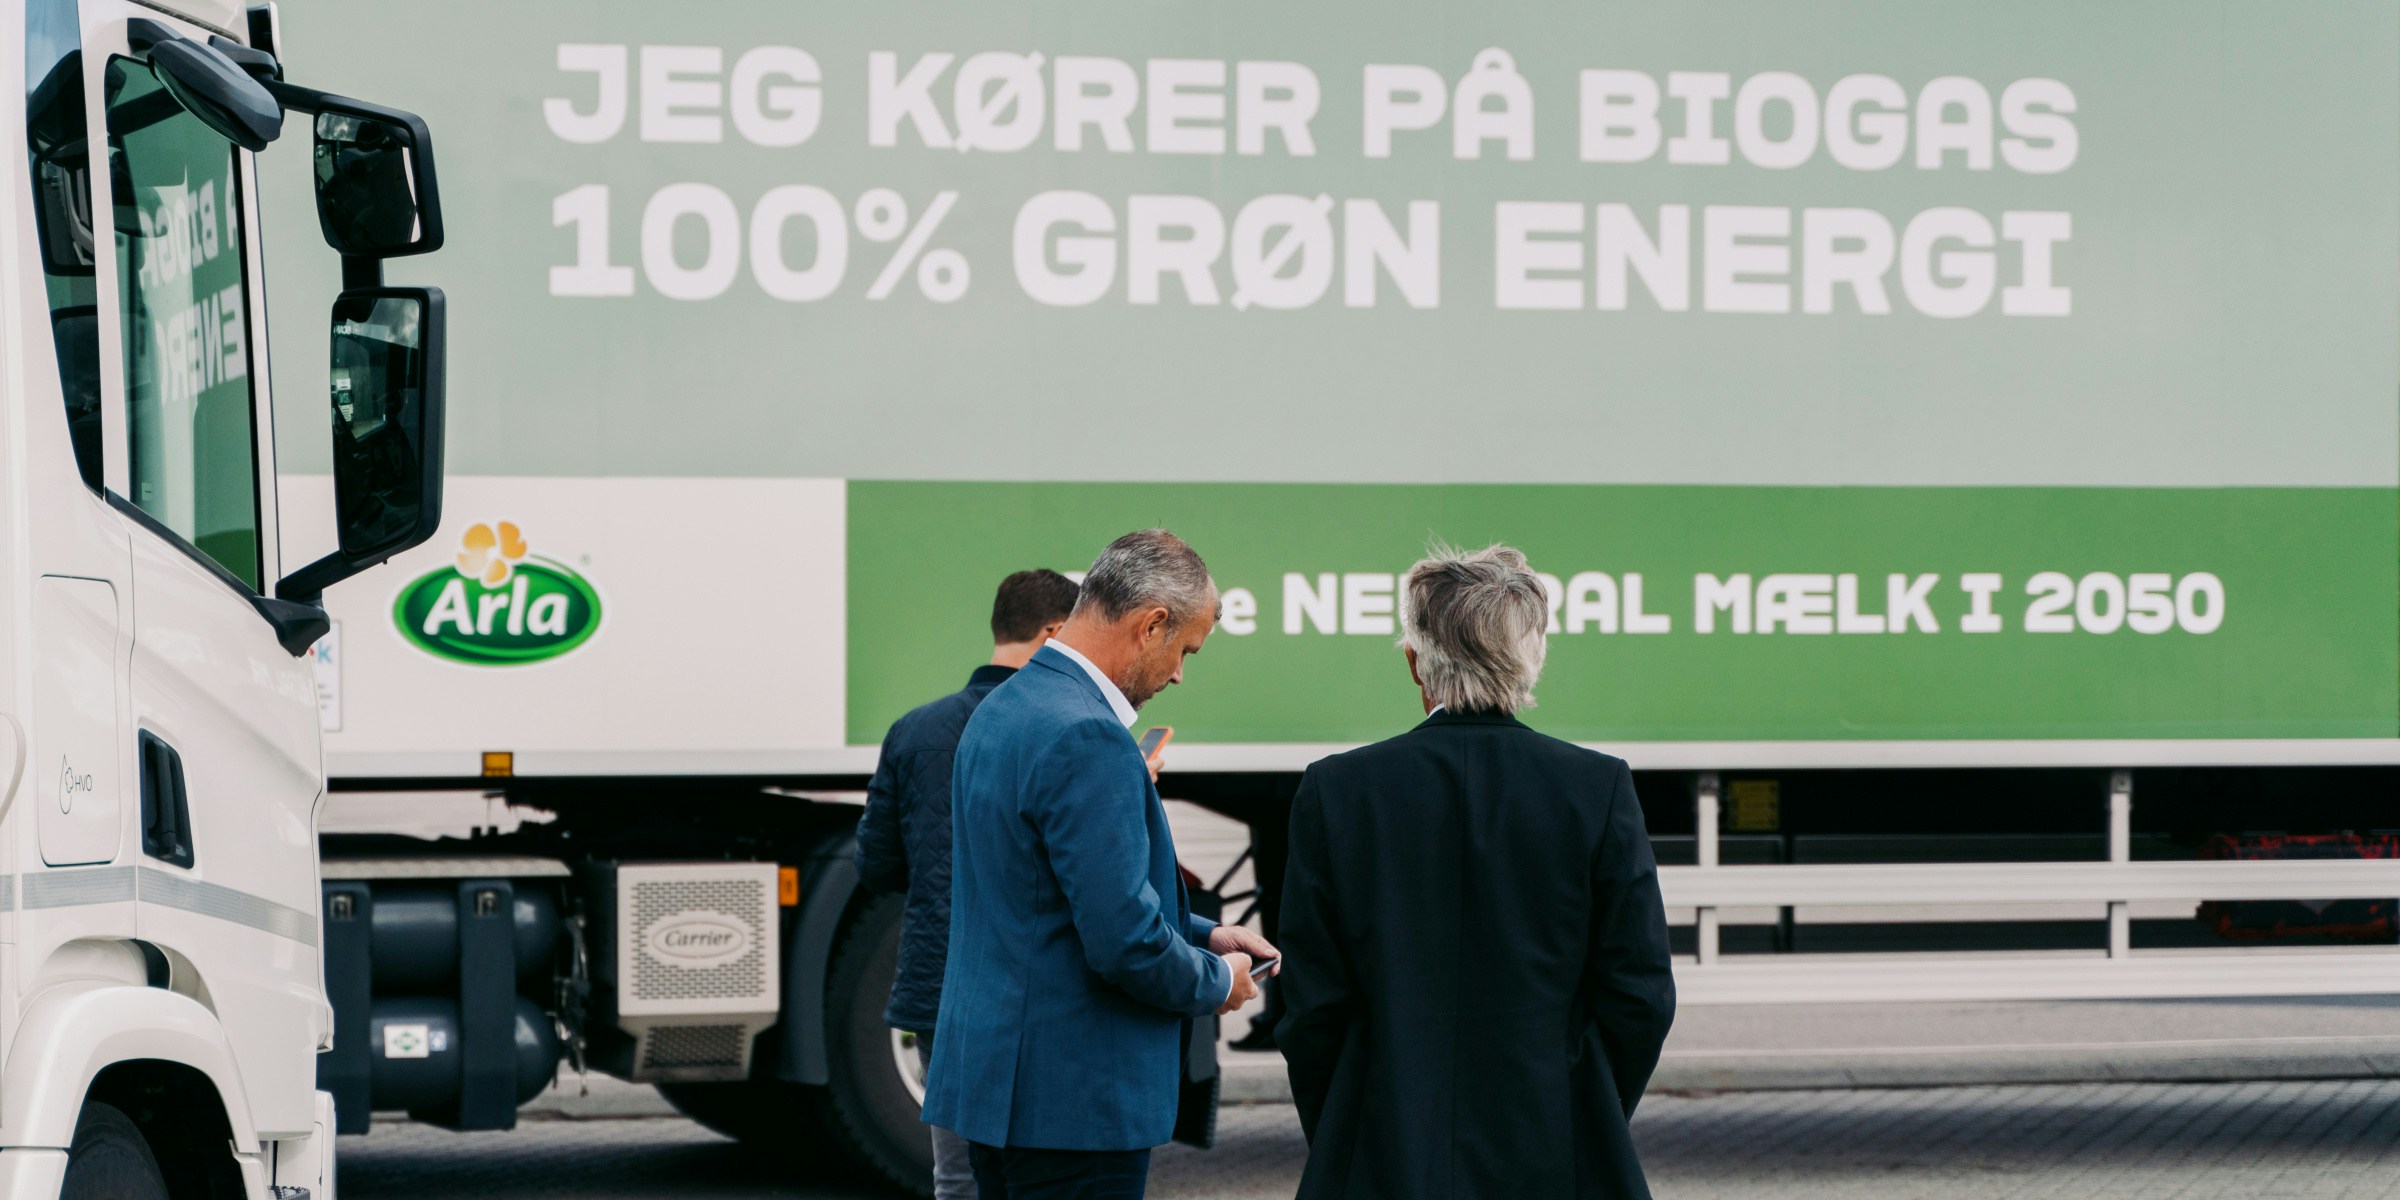 truck driving on biogas